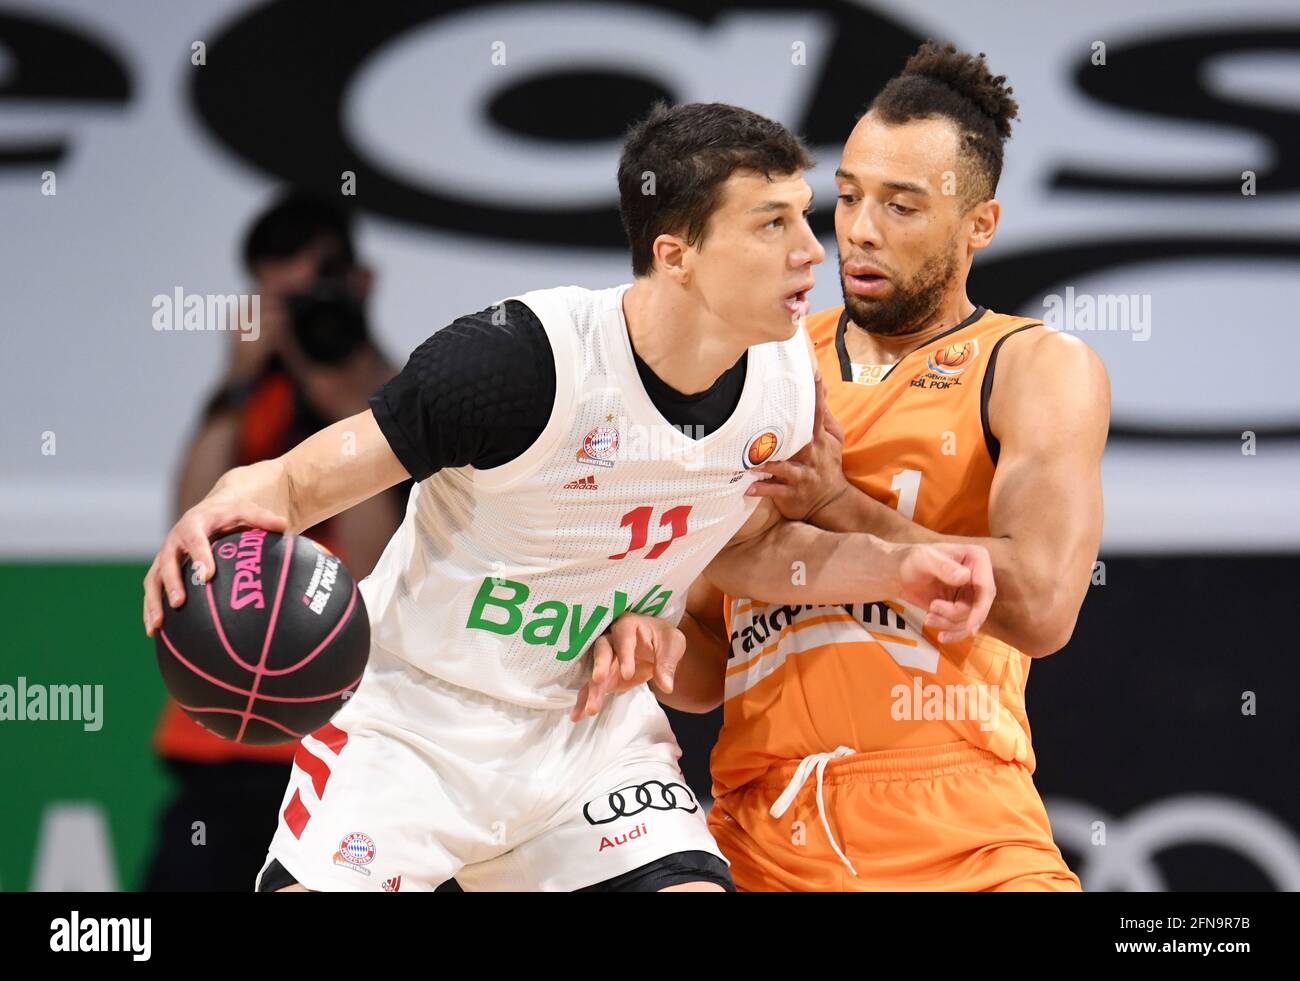 Munich, Germany. 15th May, 2021. Basketball: BBL Cup, ratiopharm Ulm - FC  Bayern München, Final Four, semi-final at the Audi Dome. Vladimir Lucic (l)  of Bayern Munich and Demitrius Conger of Ulm.